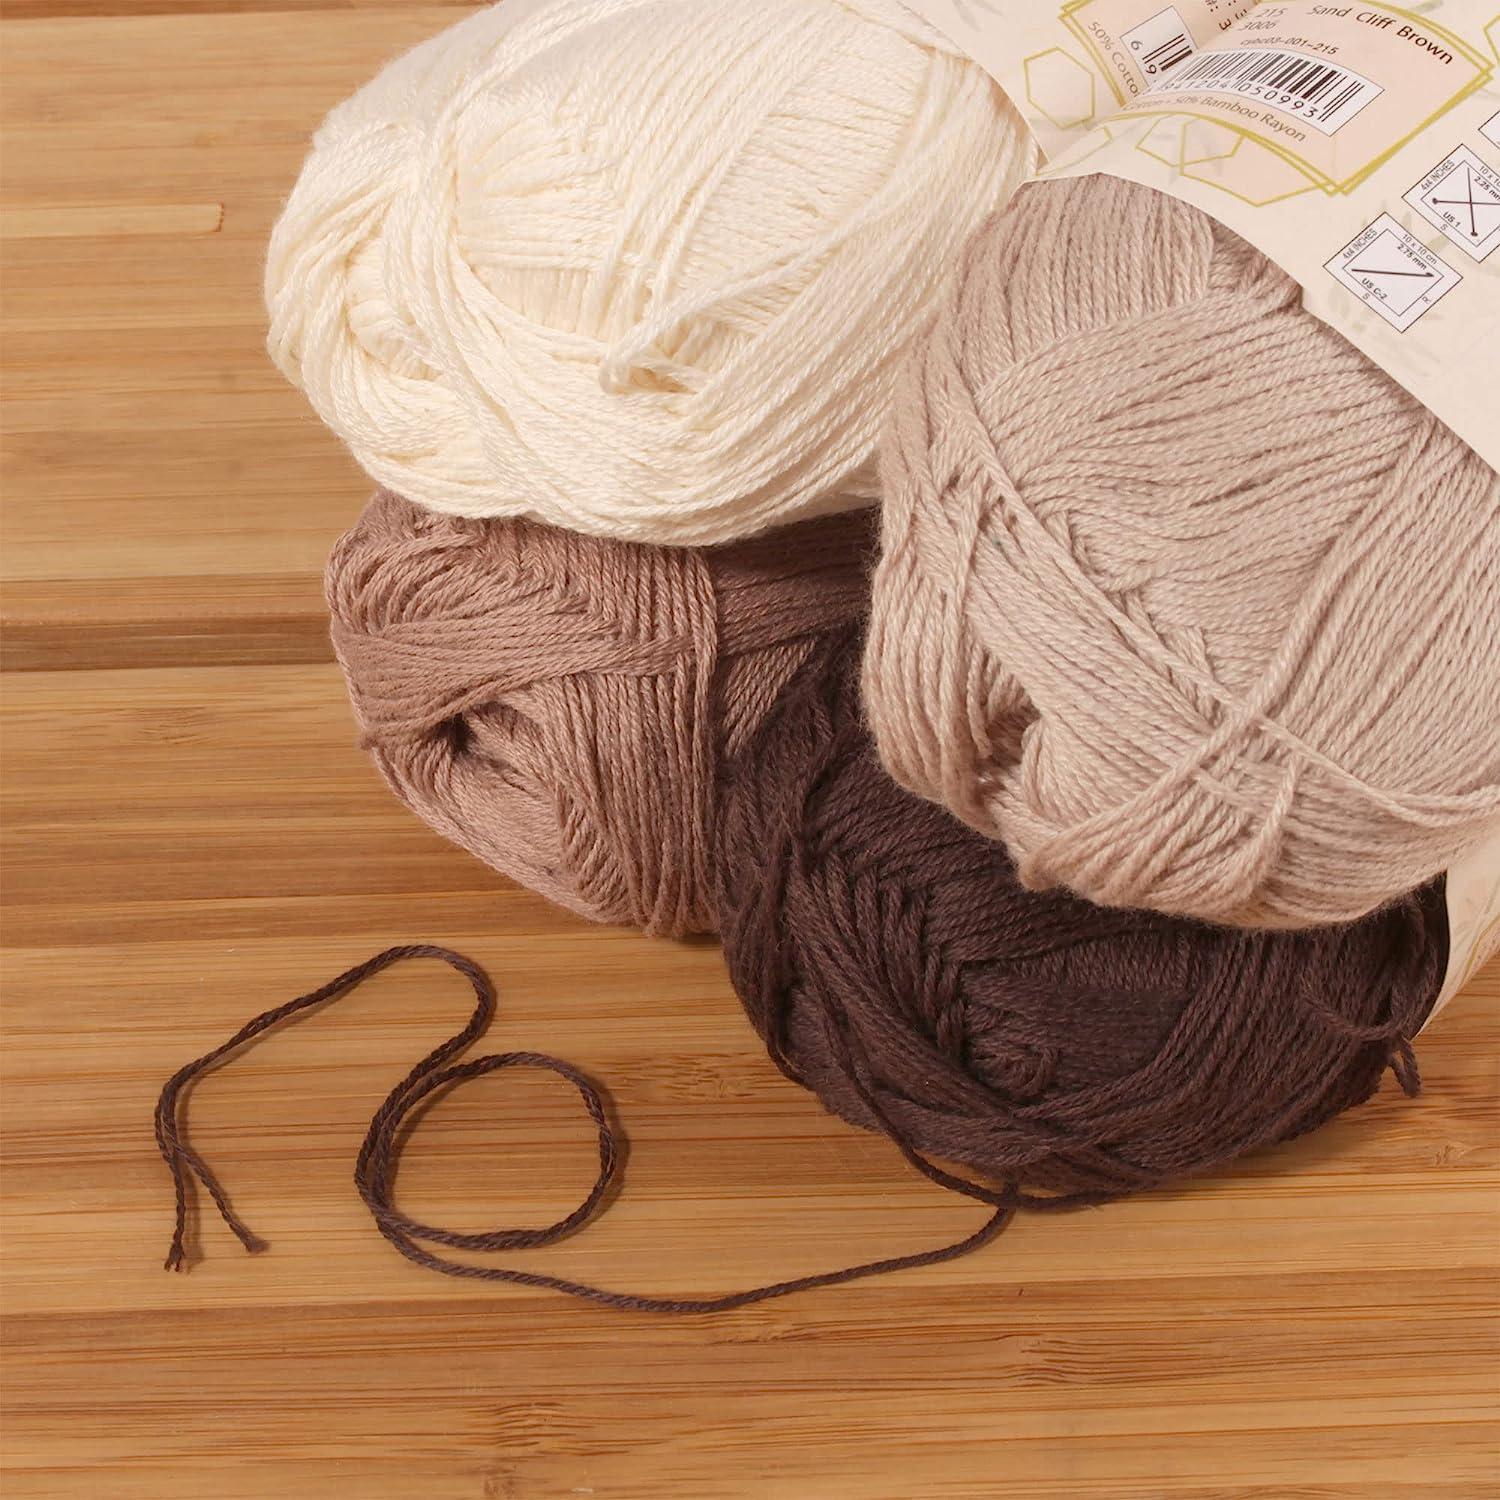 Pack of 10, 50g Soft Cotton Yarn Skeins for Crochet and Knitting